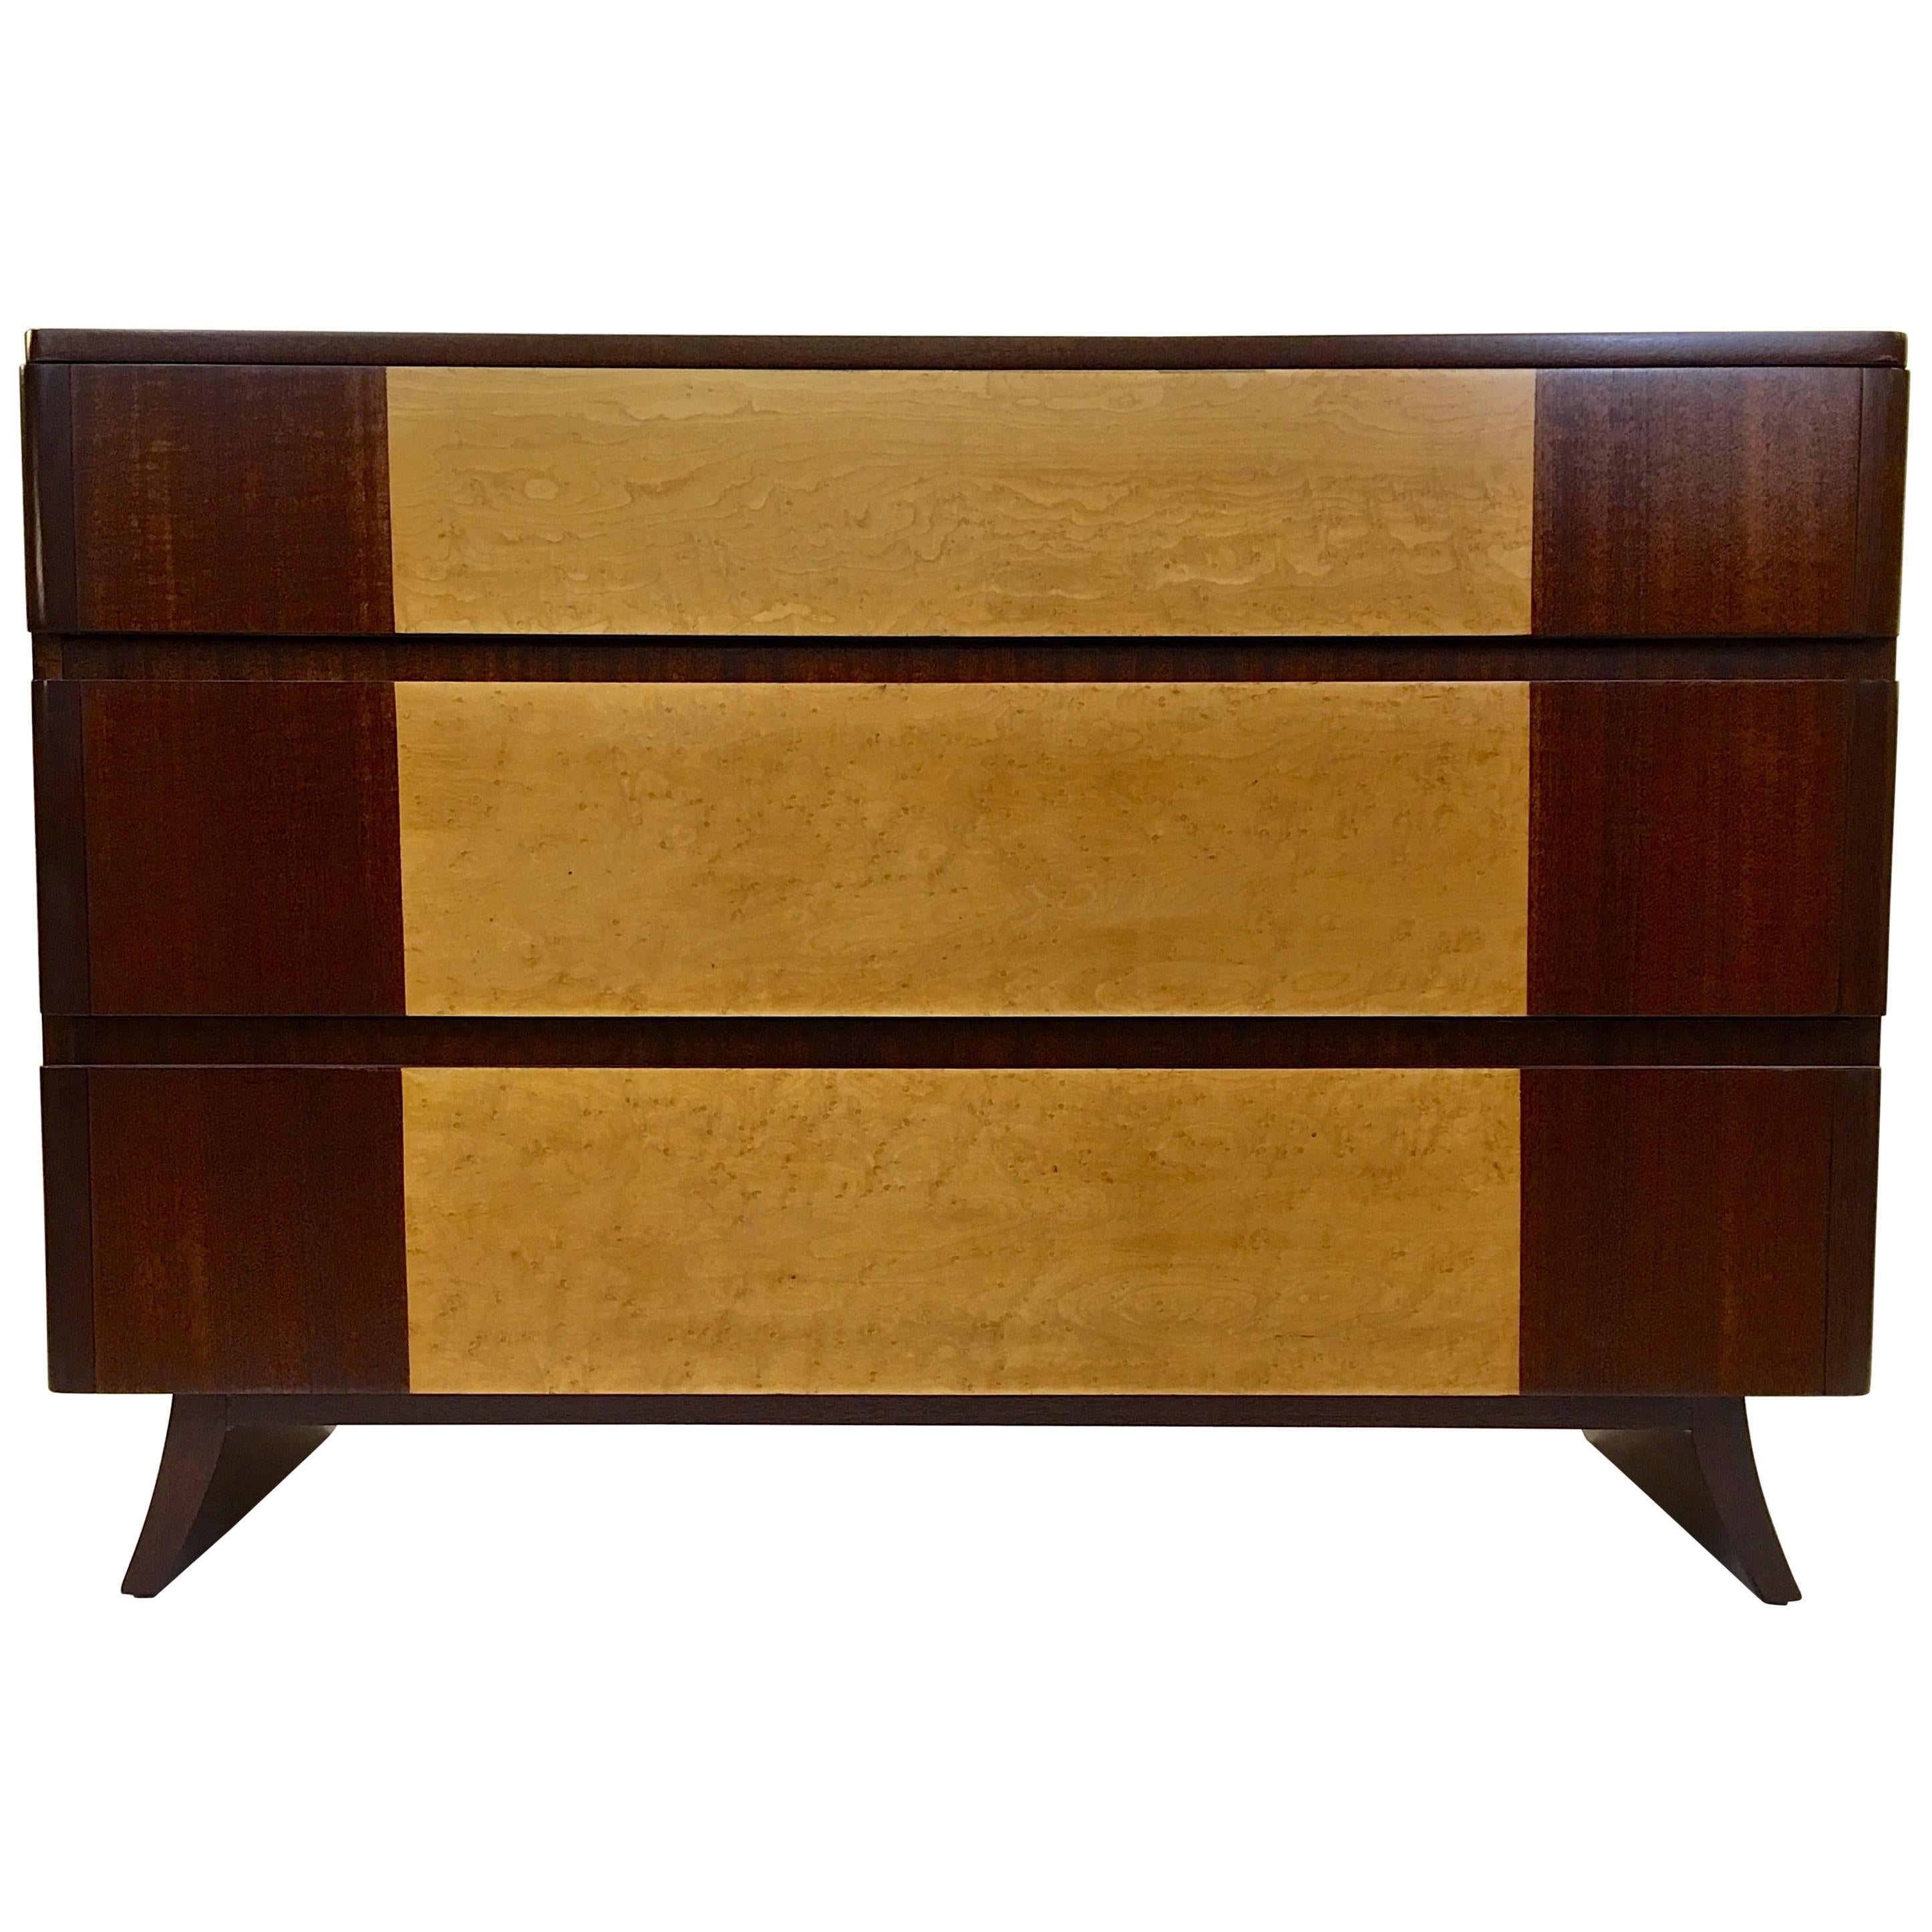 American Art Deco Chest of Drawers by R-Way